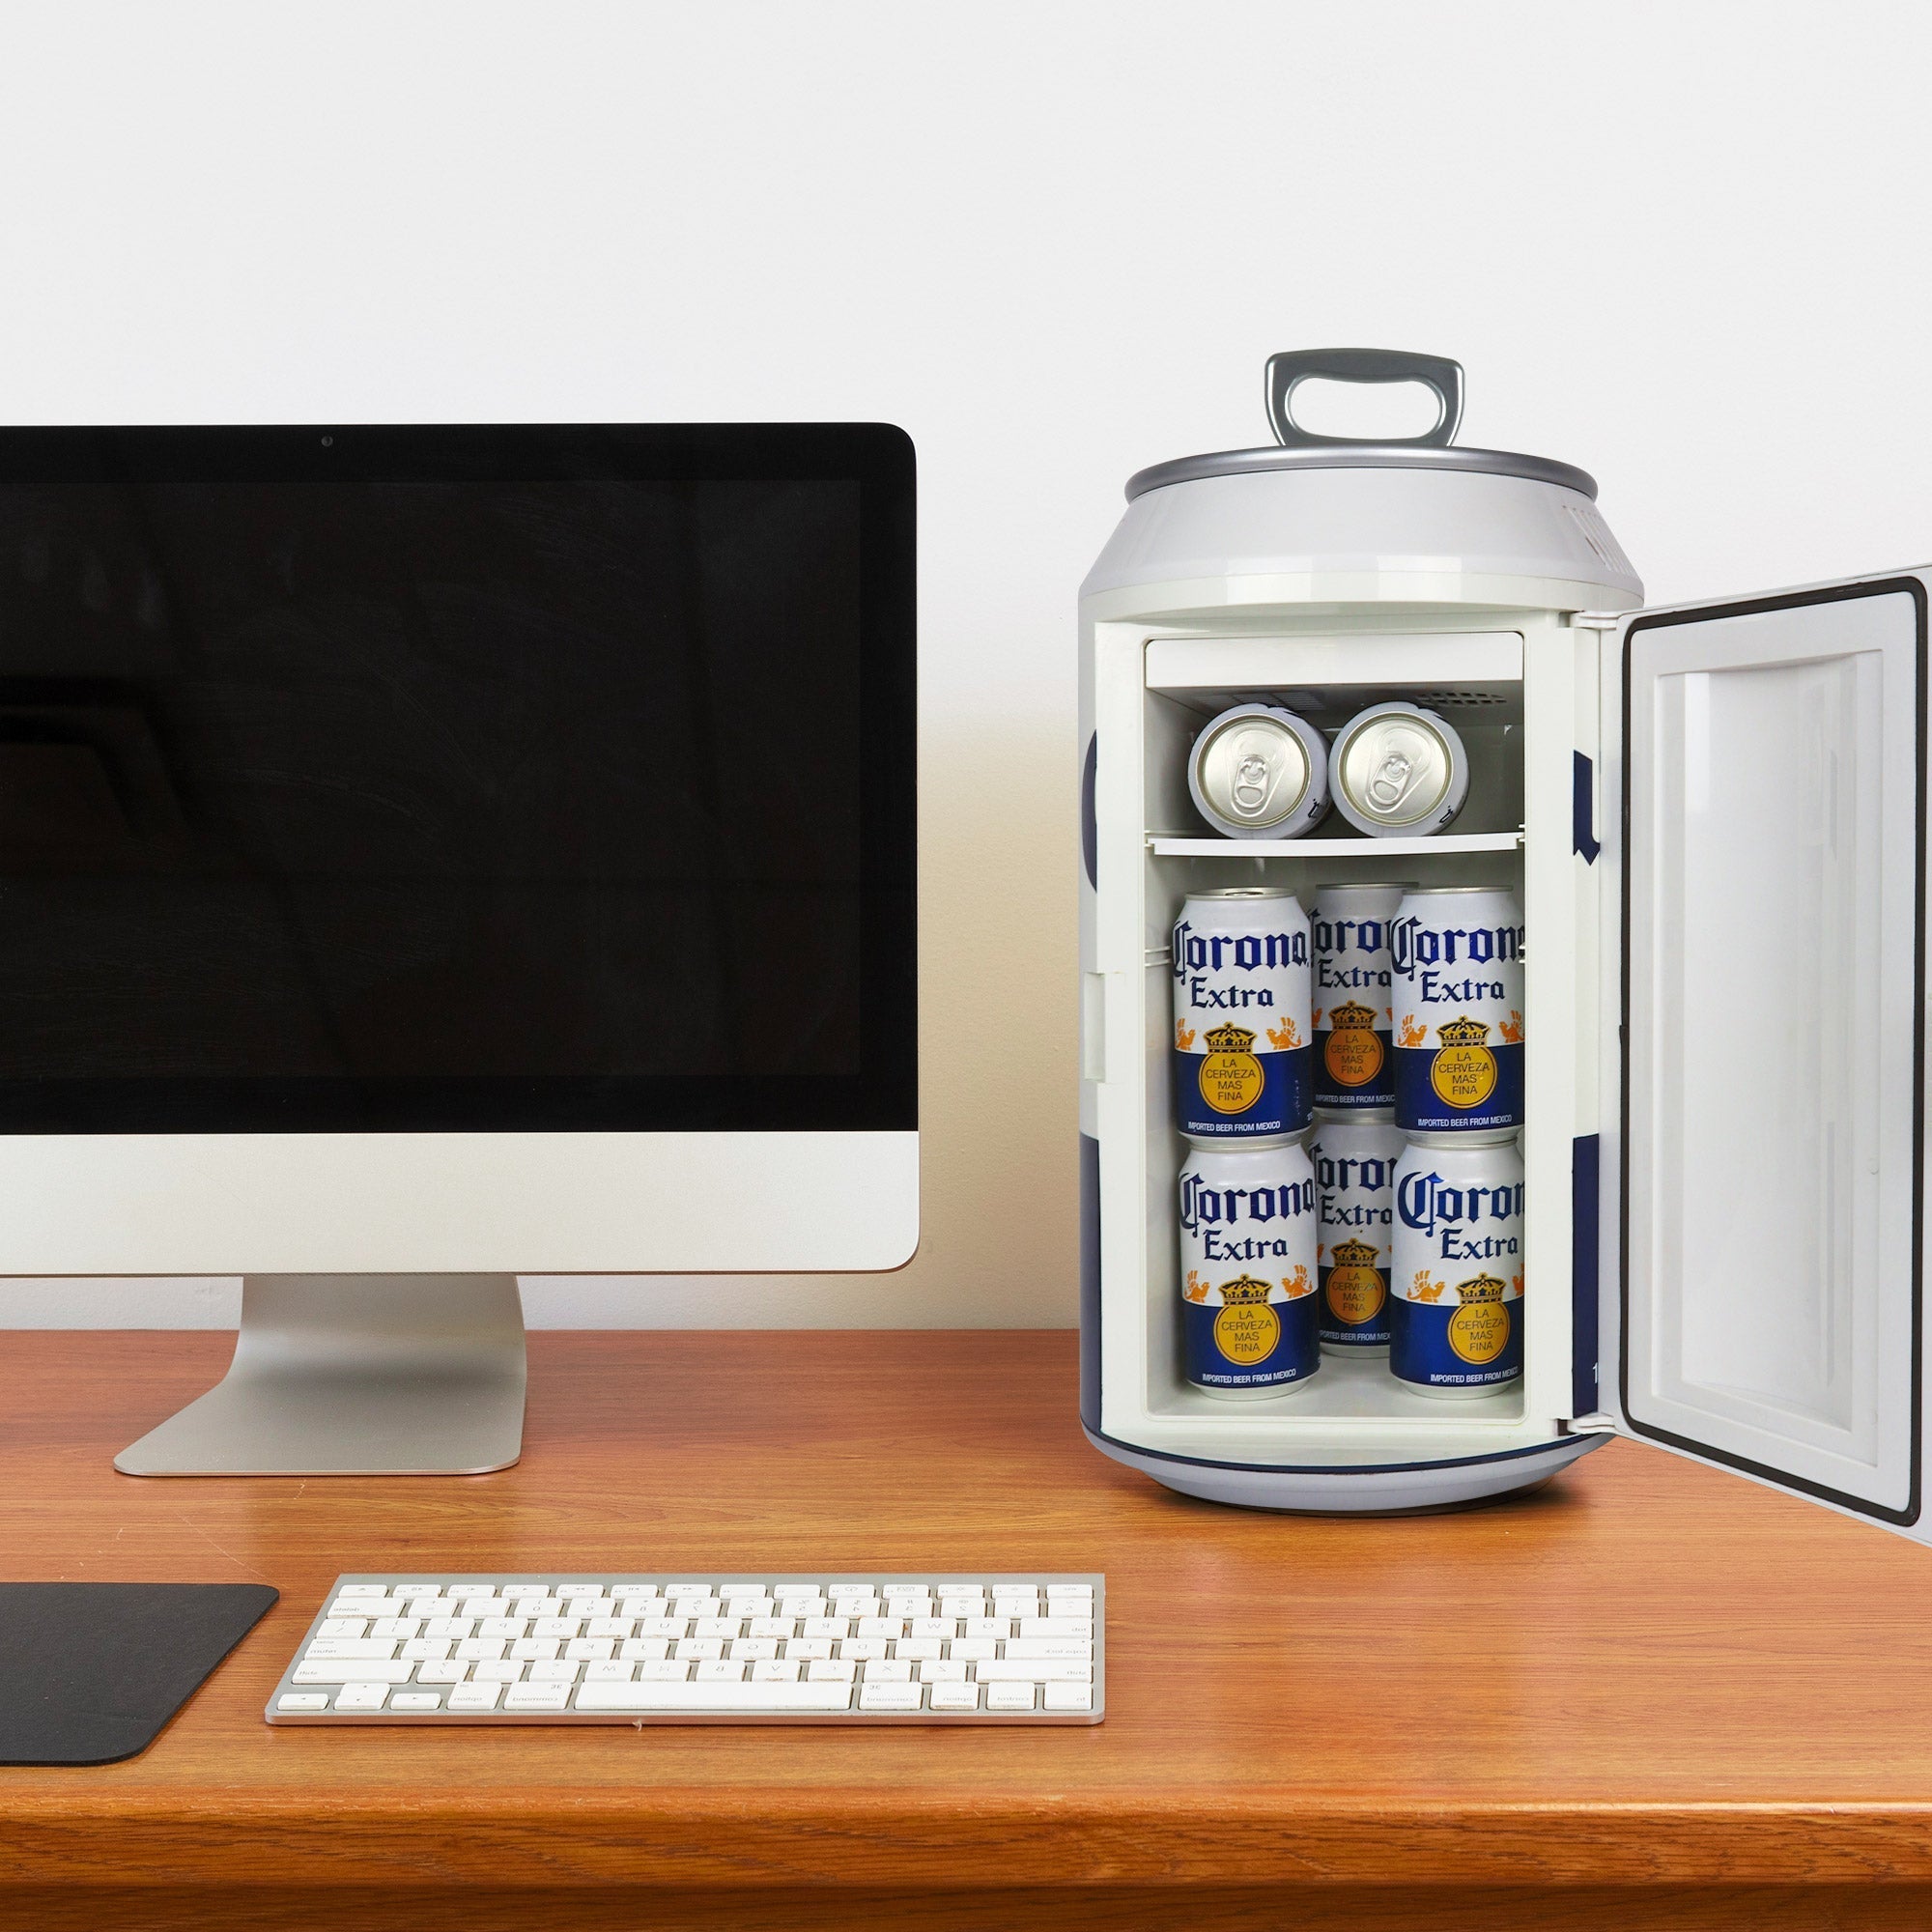 Lifestyle image of Corona can-shaped mini fridge, open with 8 cans of Corona beer inside, on a wooden desktop with a computer monitor and keyboard beside and a white wall behind